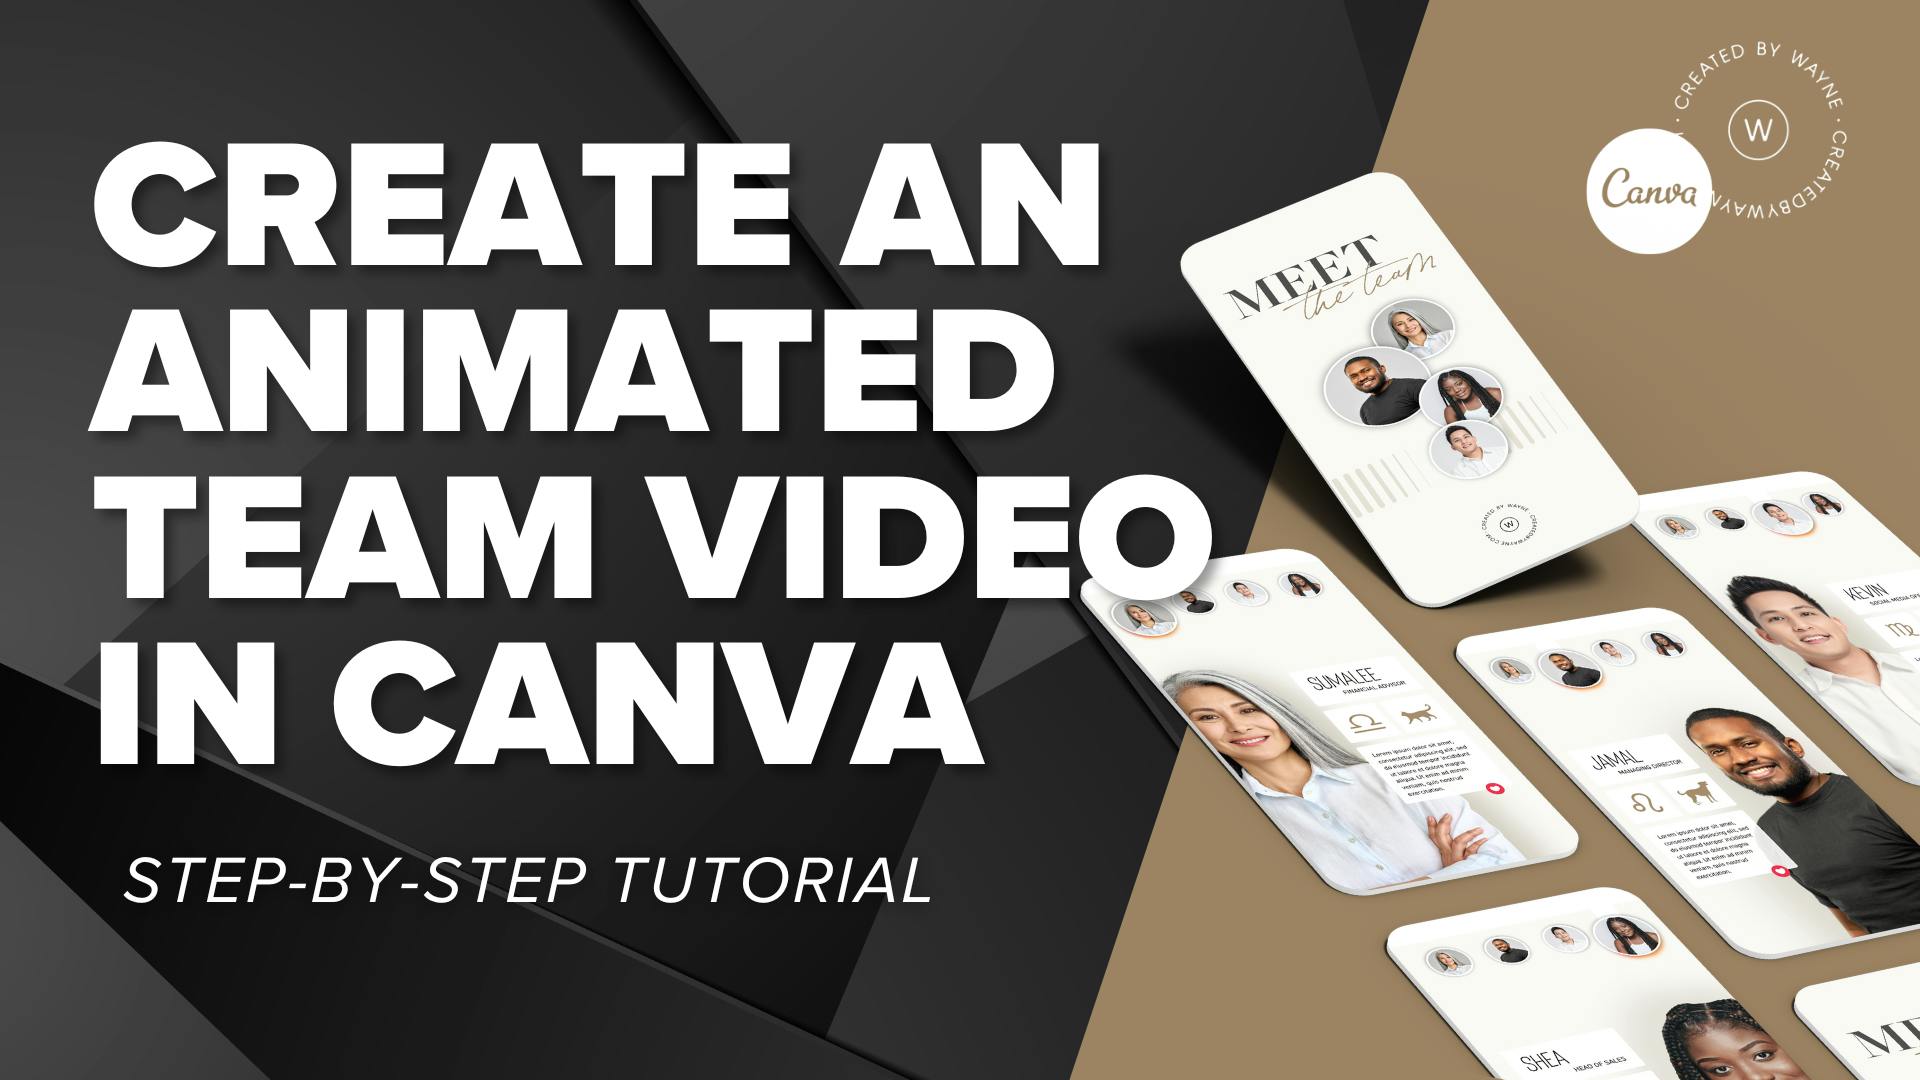 YouTube Thumbnail with the words "One idea, endless content - with Canva's new AI Tools"